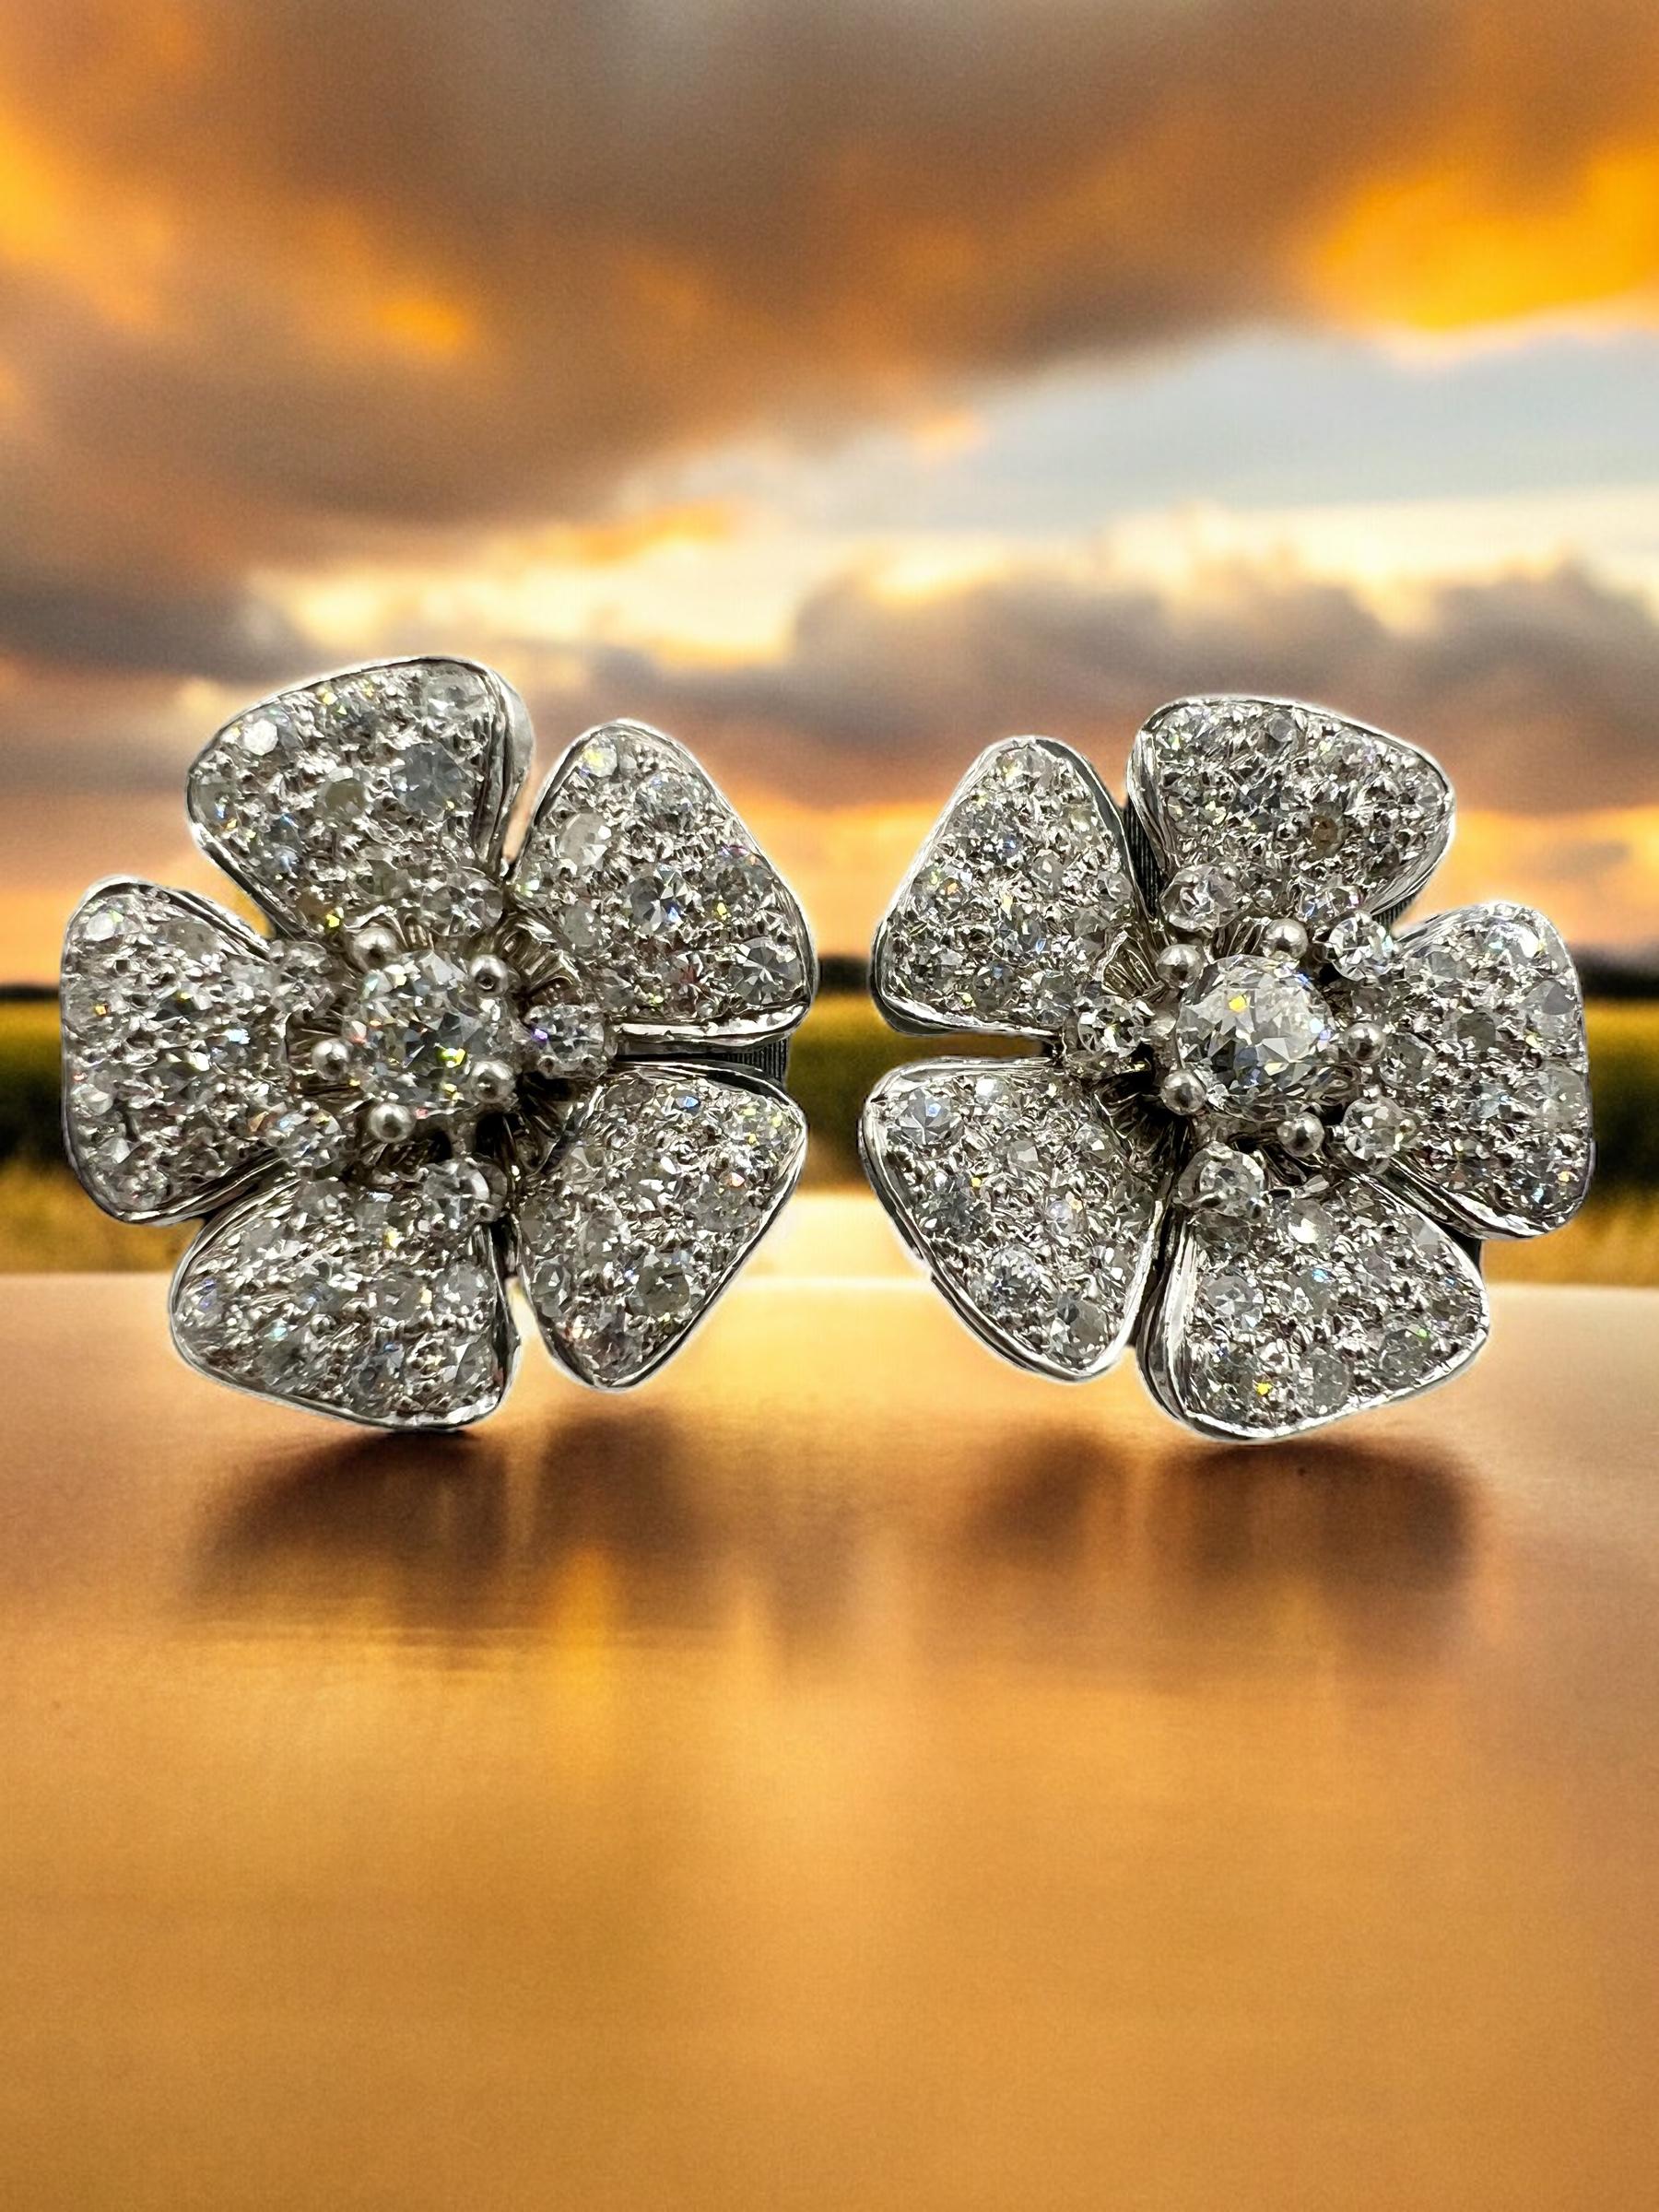 Vintage diamond flower platinum clip-on earrings, circa 1950s.

Vintage Diamond Flower Platinum Earrings are a timeless and elegant accessory that every woman should have in her jewelry collection. These exquisite earrings exude sophistication and